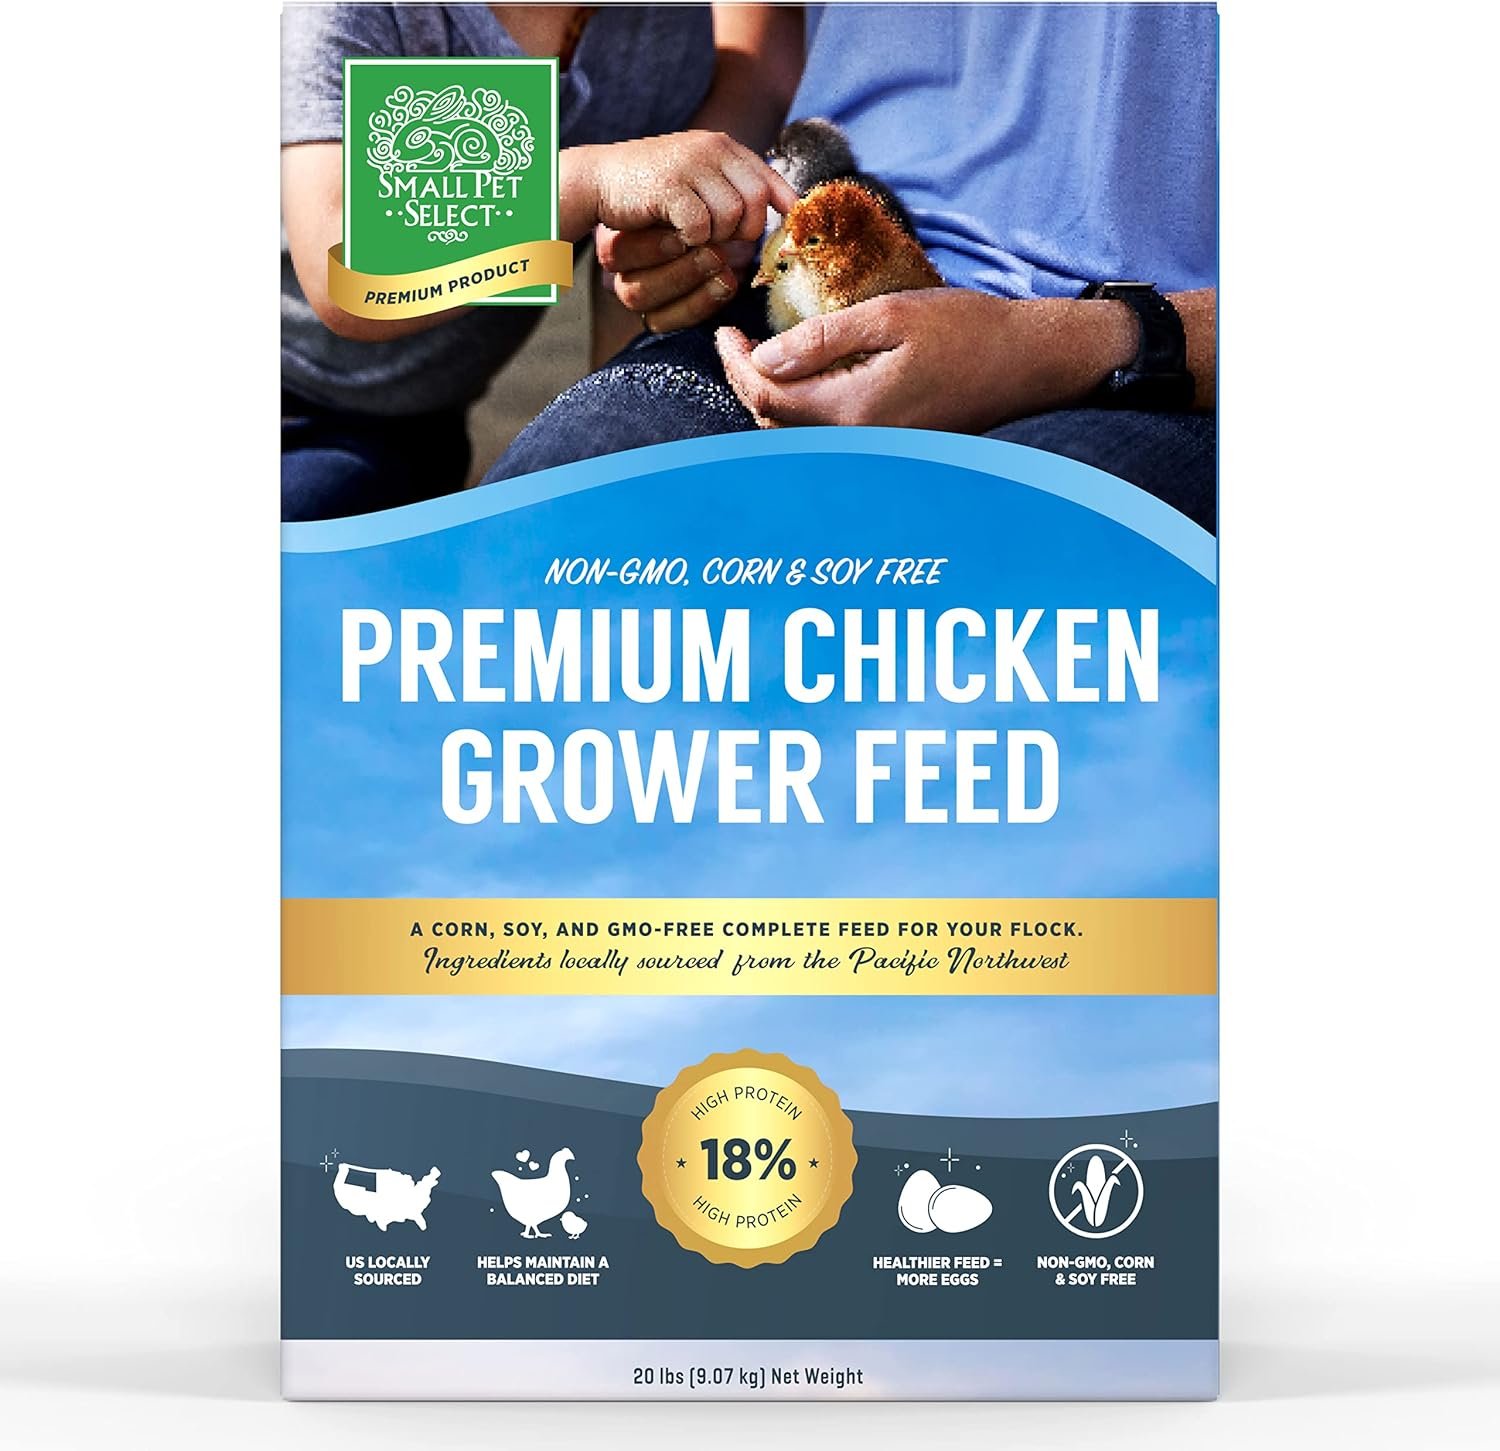 Small Pet Select - Chicken Grower Feed, Non-GMO, Corn  Soy Free, 20lb